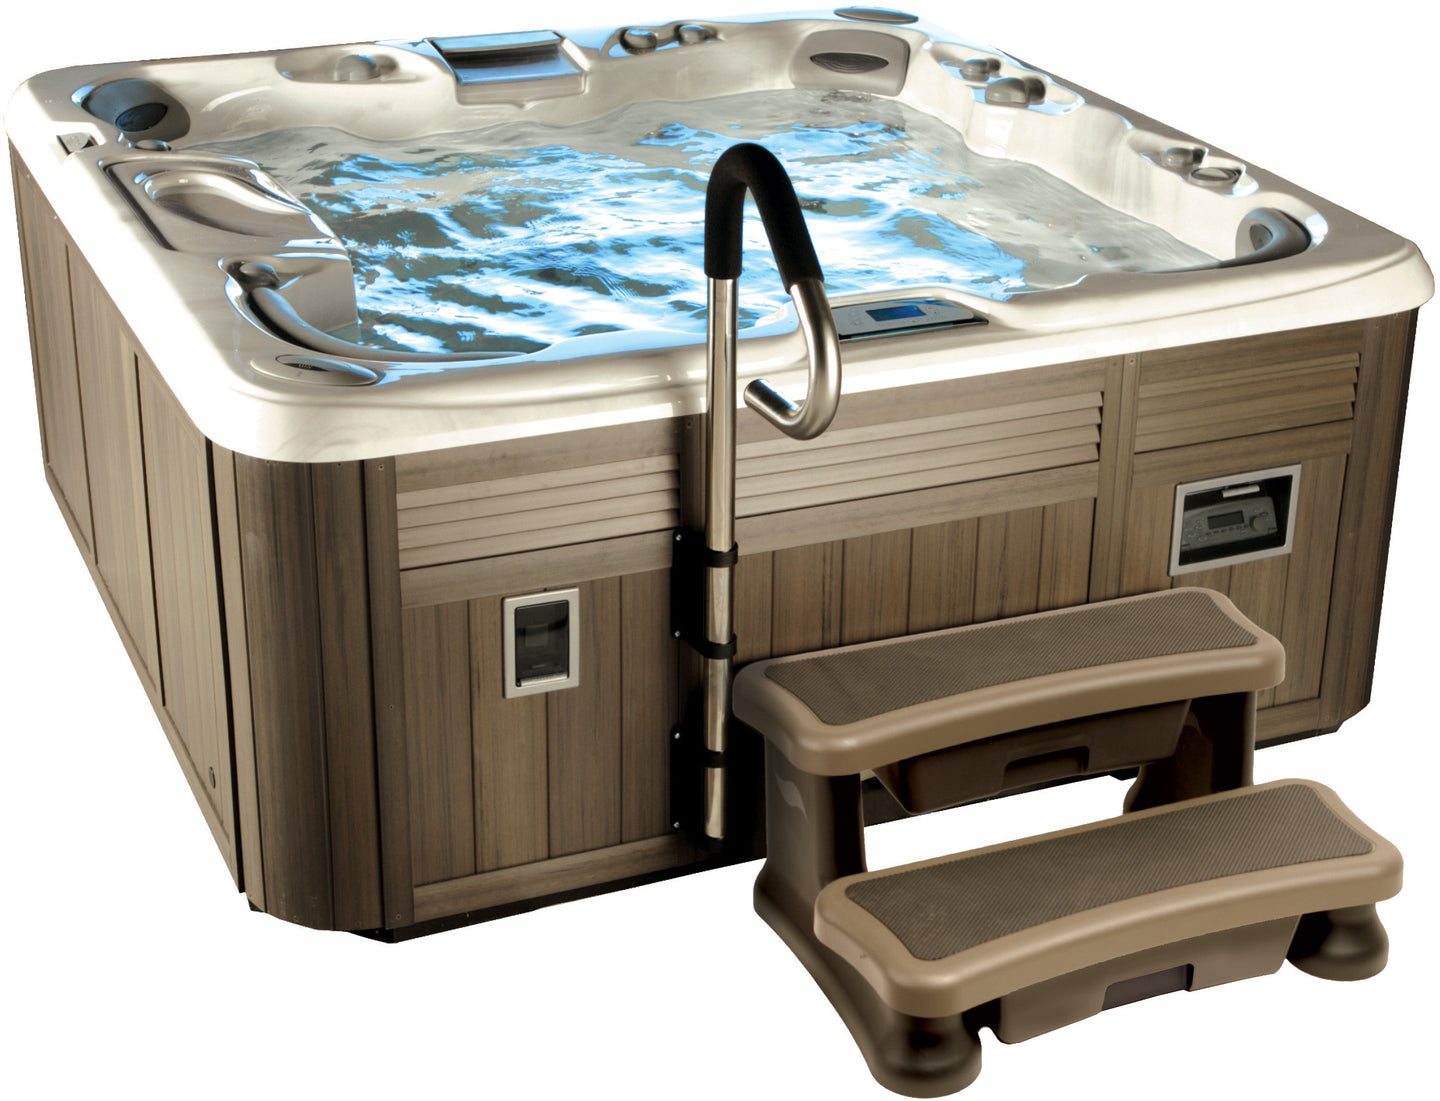 Safe-T-Rail - Stainless Steel - Jacuzzi-producten.nl